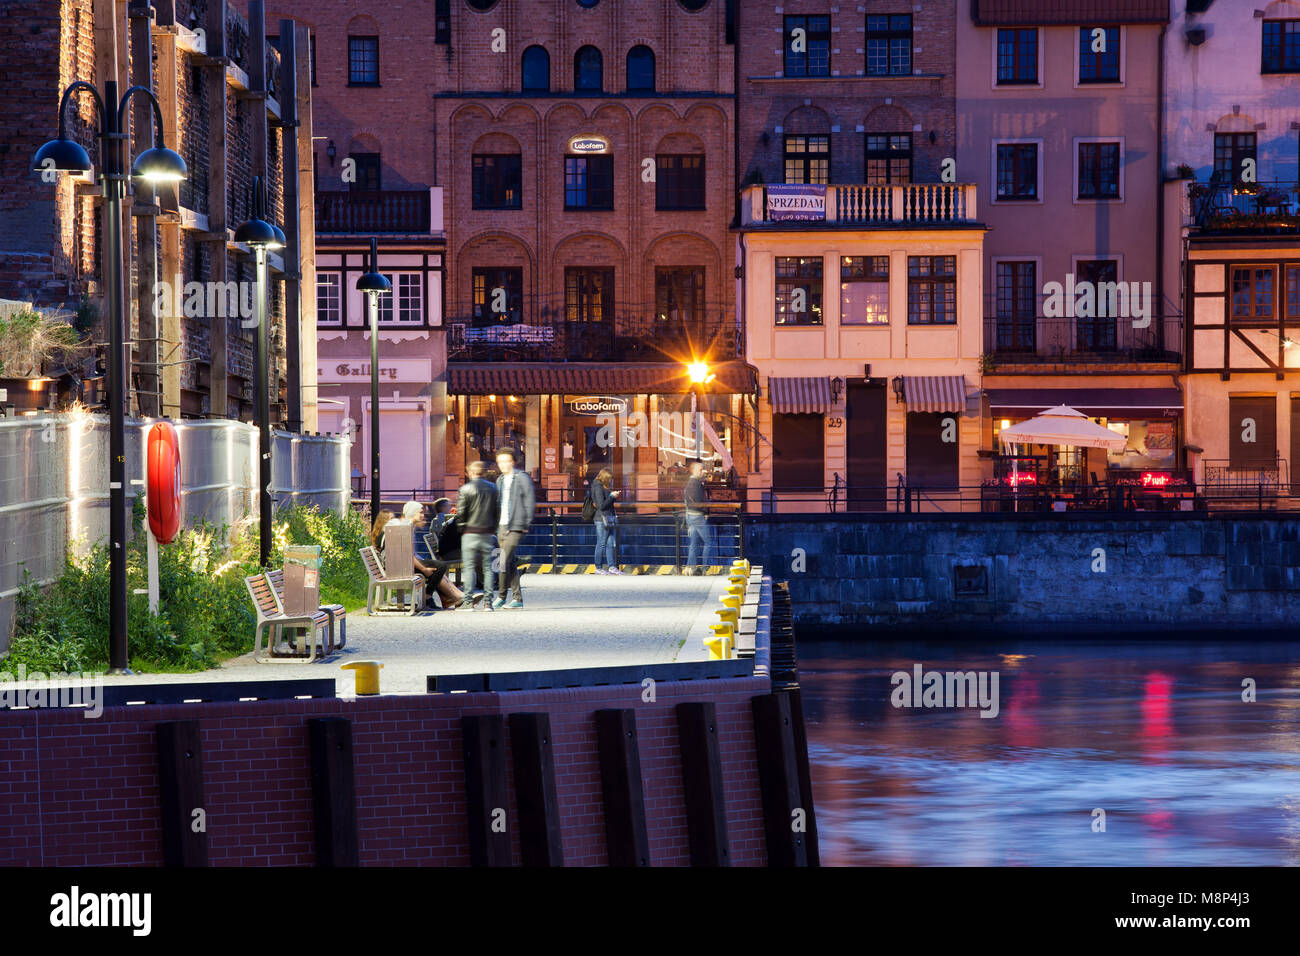 City break at Gdansk Old Town river waterfront in Poland at night Stock Photo